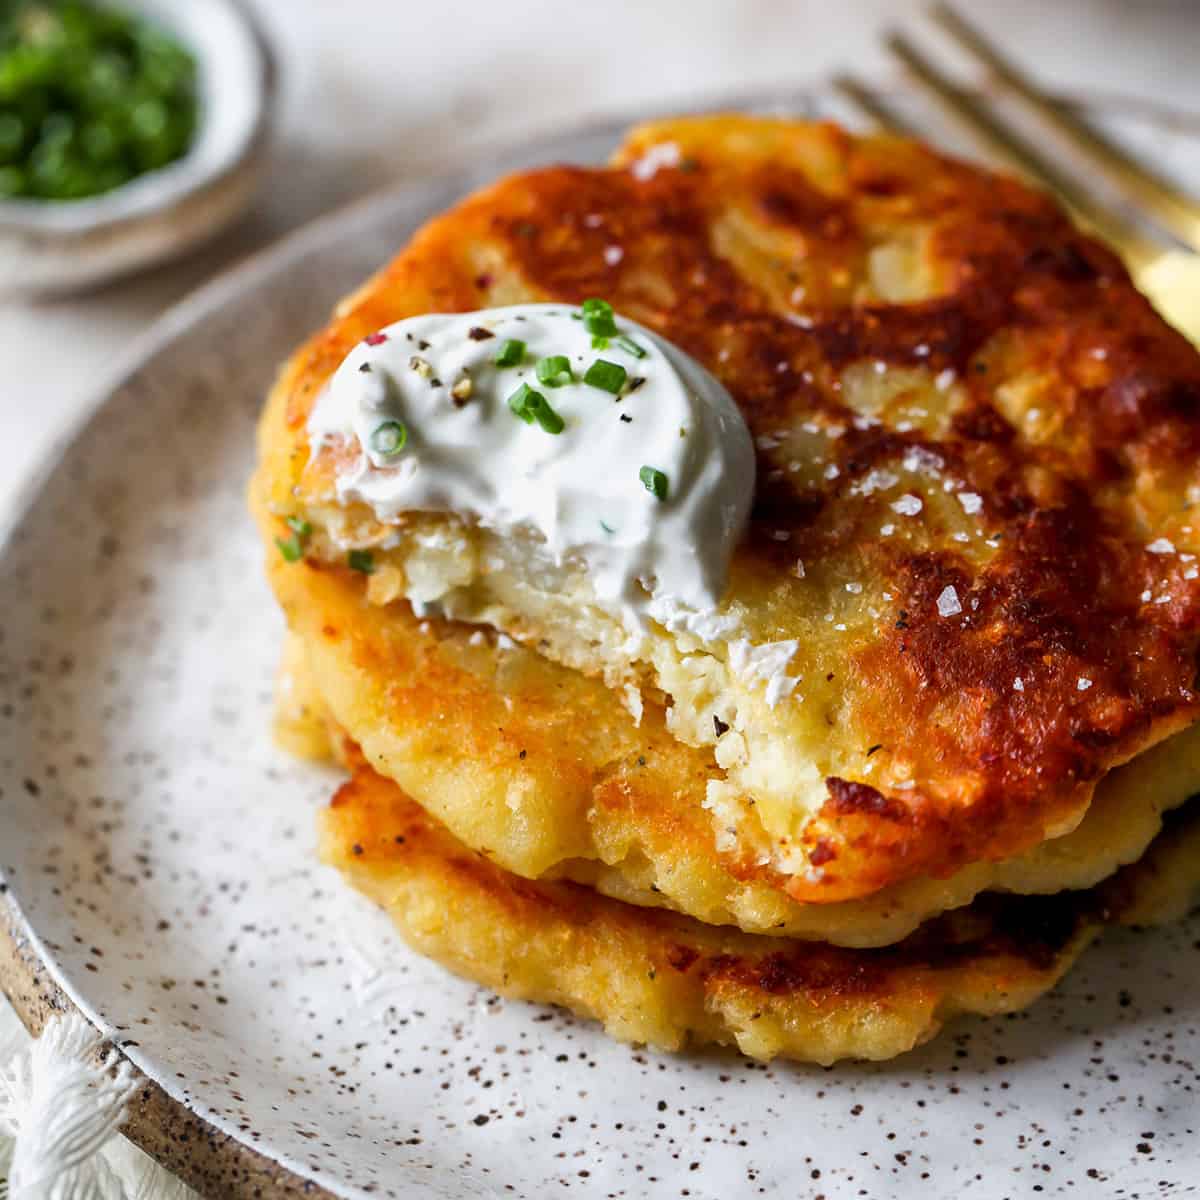 a stack of 3 Potato Pancakes, the top one has a bite taken out of it. Garnished with sour cream and chives.